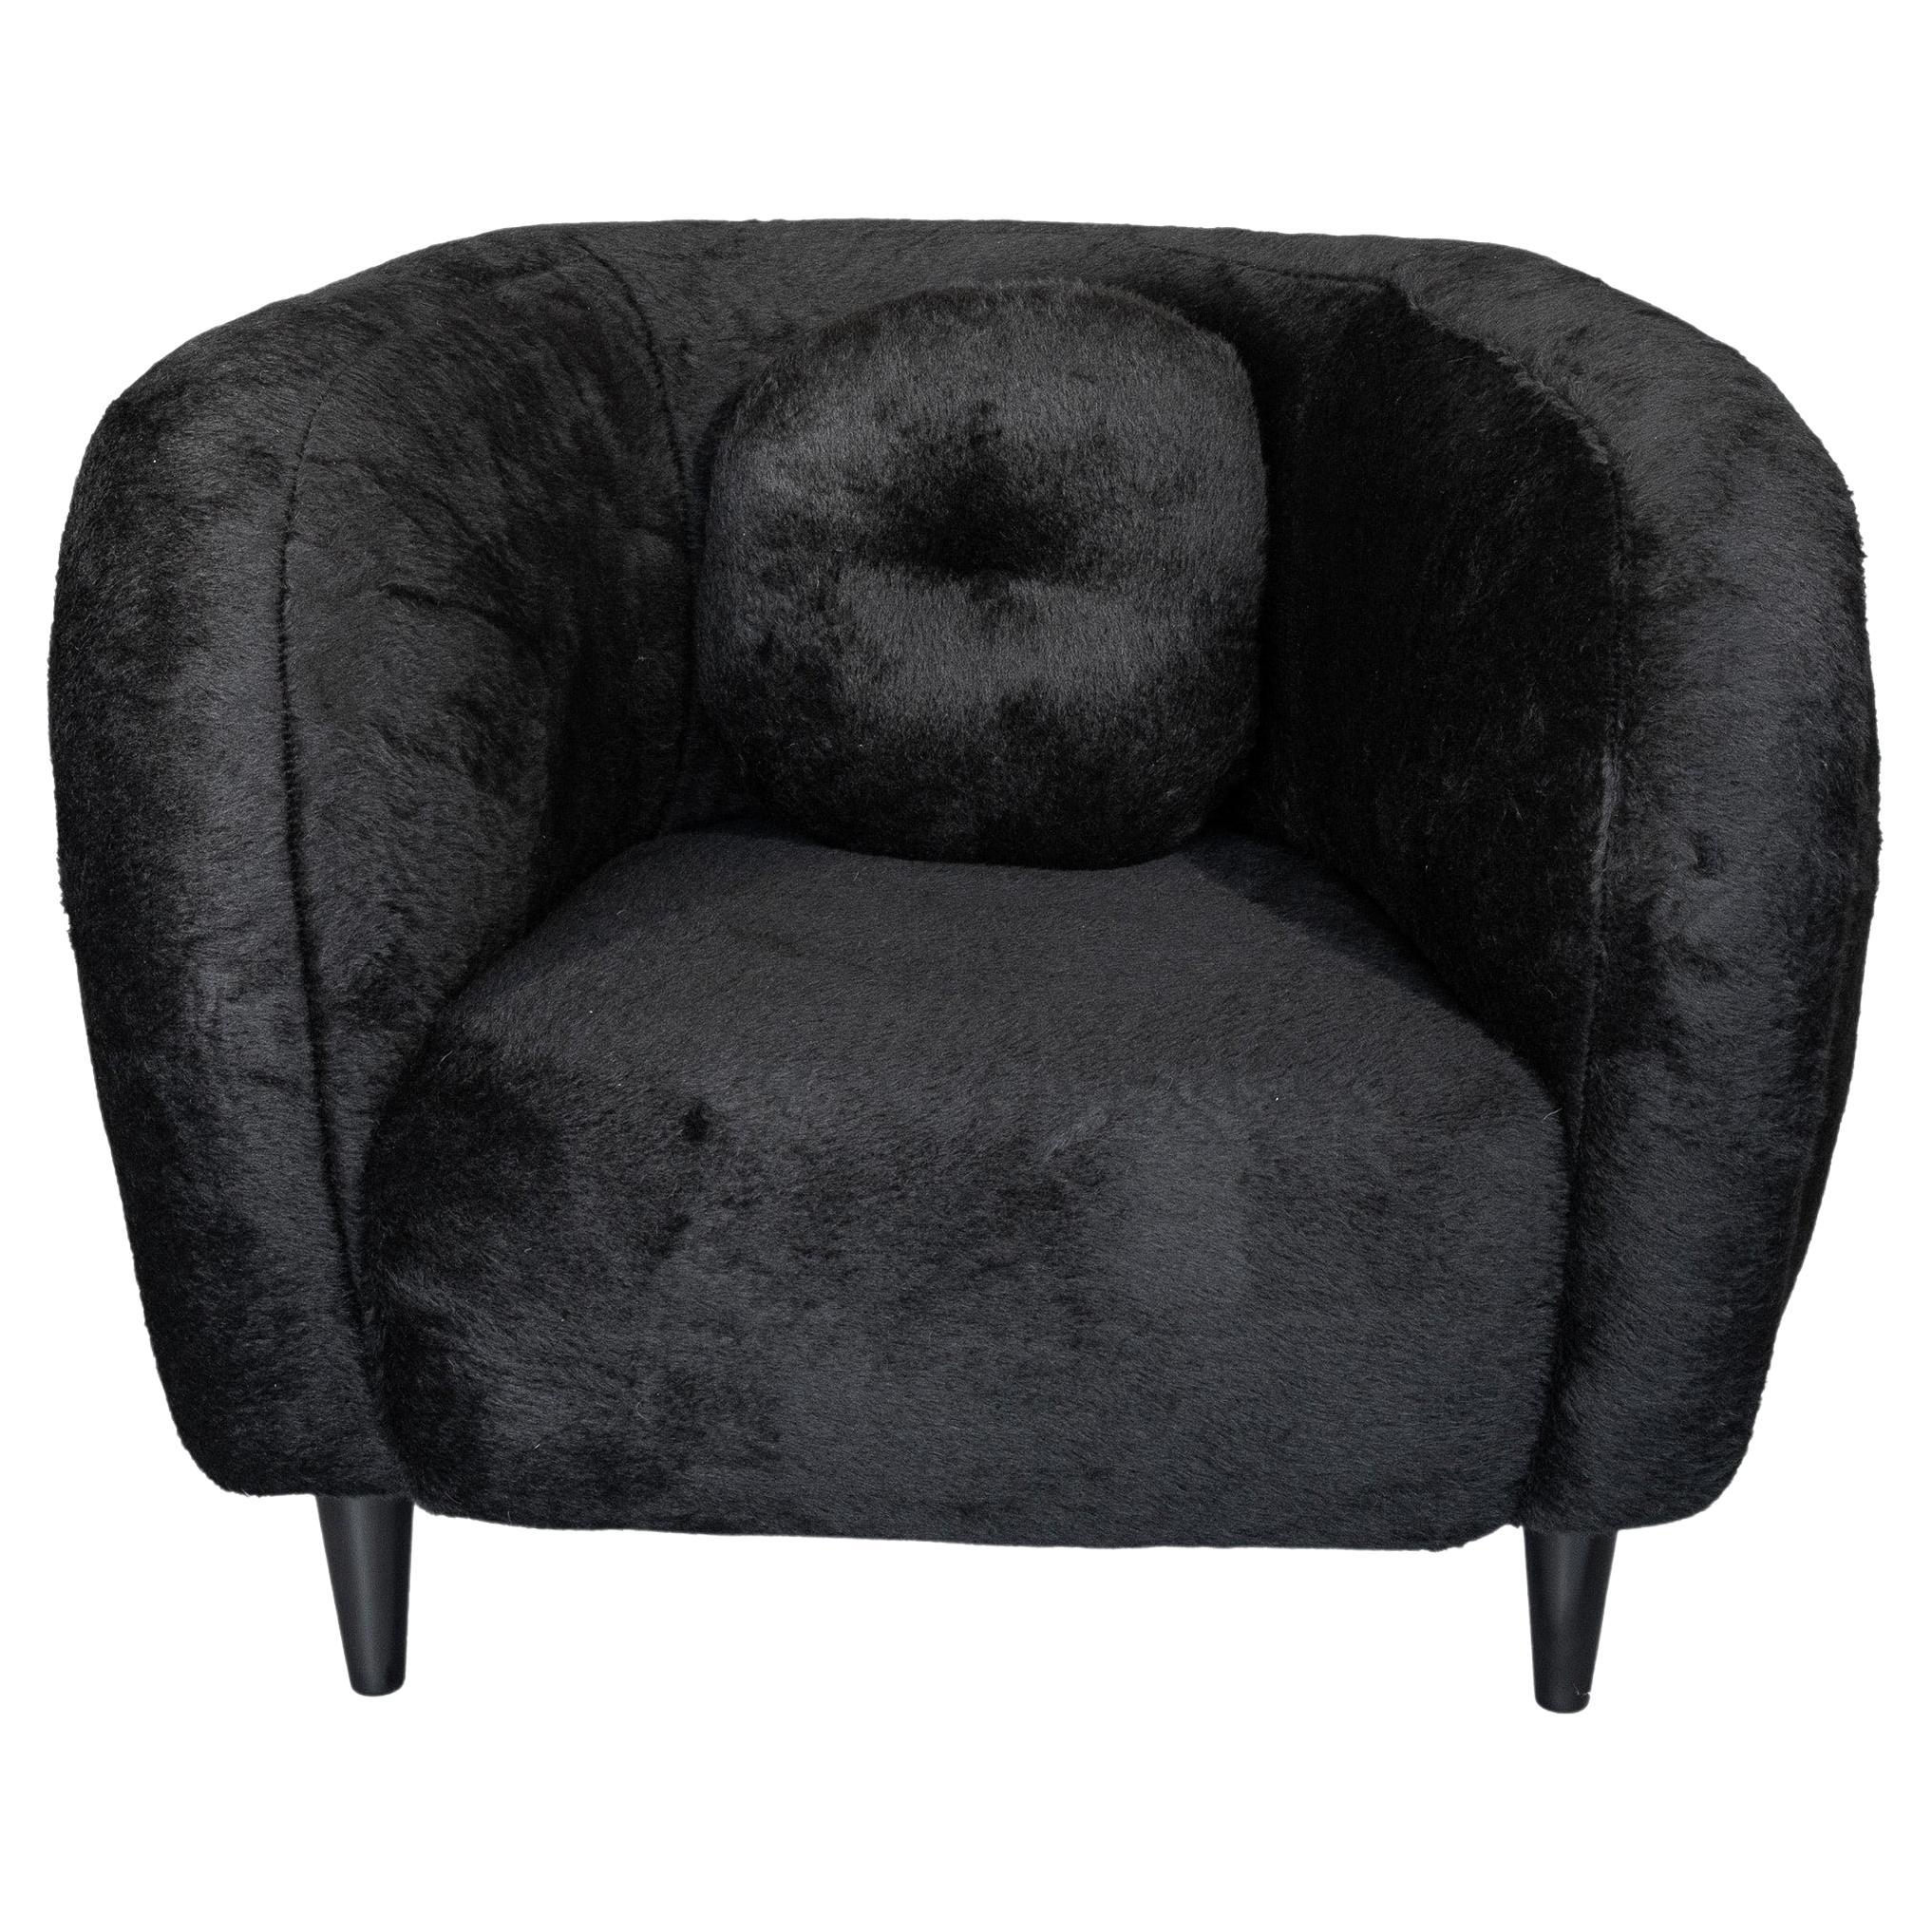 The Le Minitore chairs are made from luxurious, soft, black Alpaca wool in a curved organic design with wooden feet. Imported from France. Designed by Pierre Augustin Rose. 

These custom order Le Minitore chairs have never been touched and are